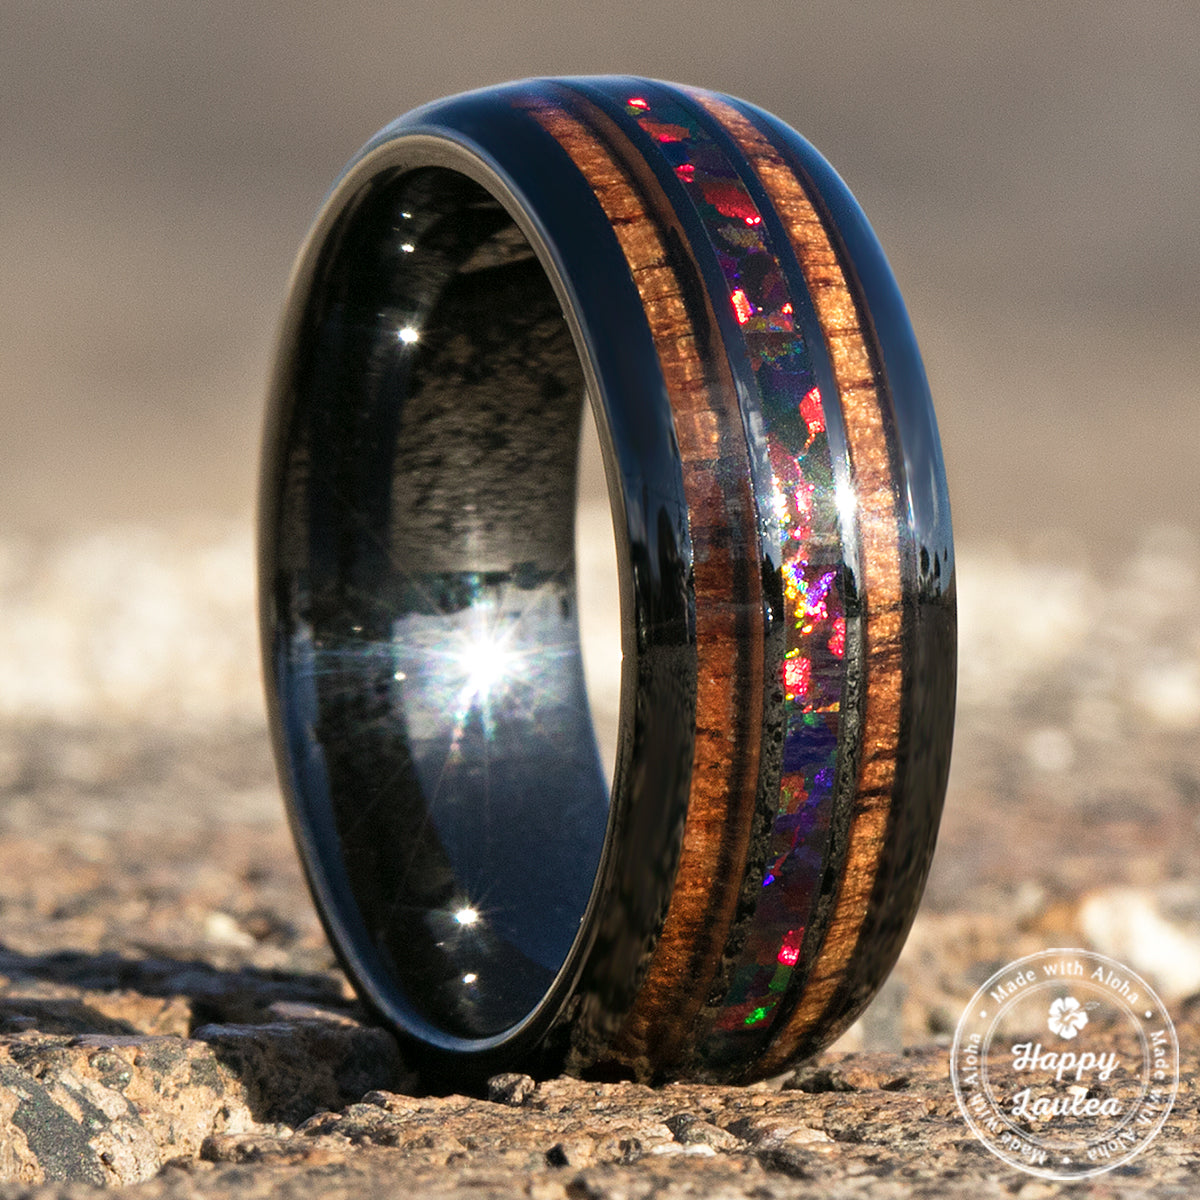 HI-TECH Black Ceramic Ring with Fire Opal & Koa Wood Tri Inlay Inlay - 8mm, Dome Shape, Comfort Fitment